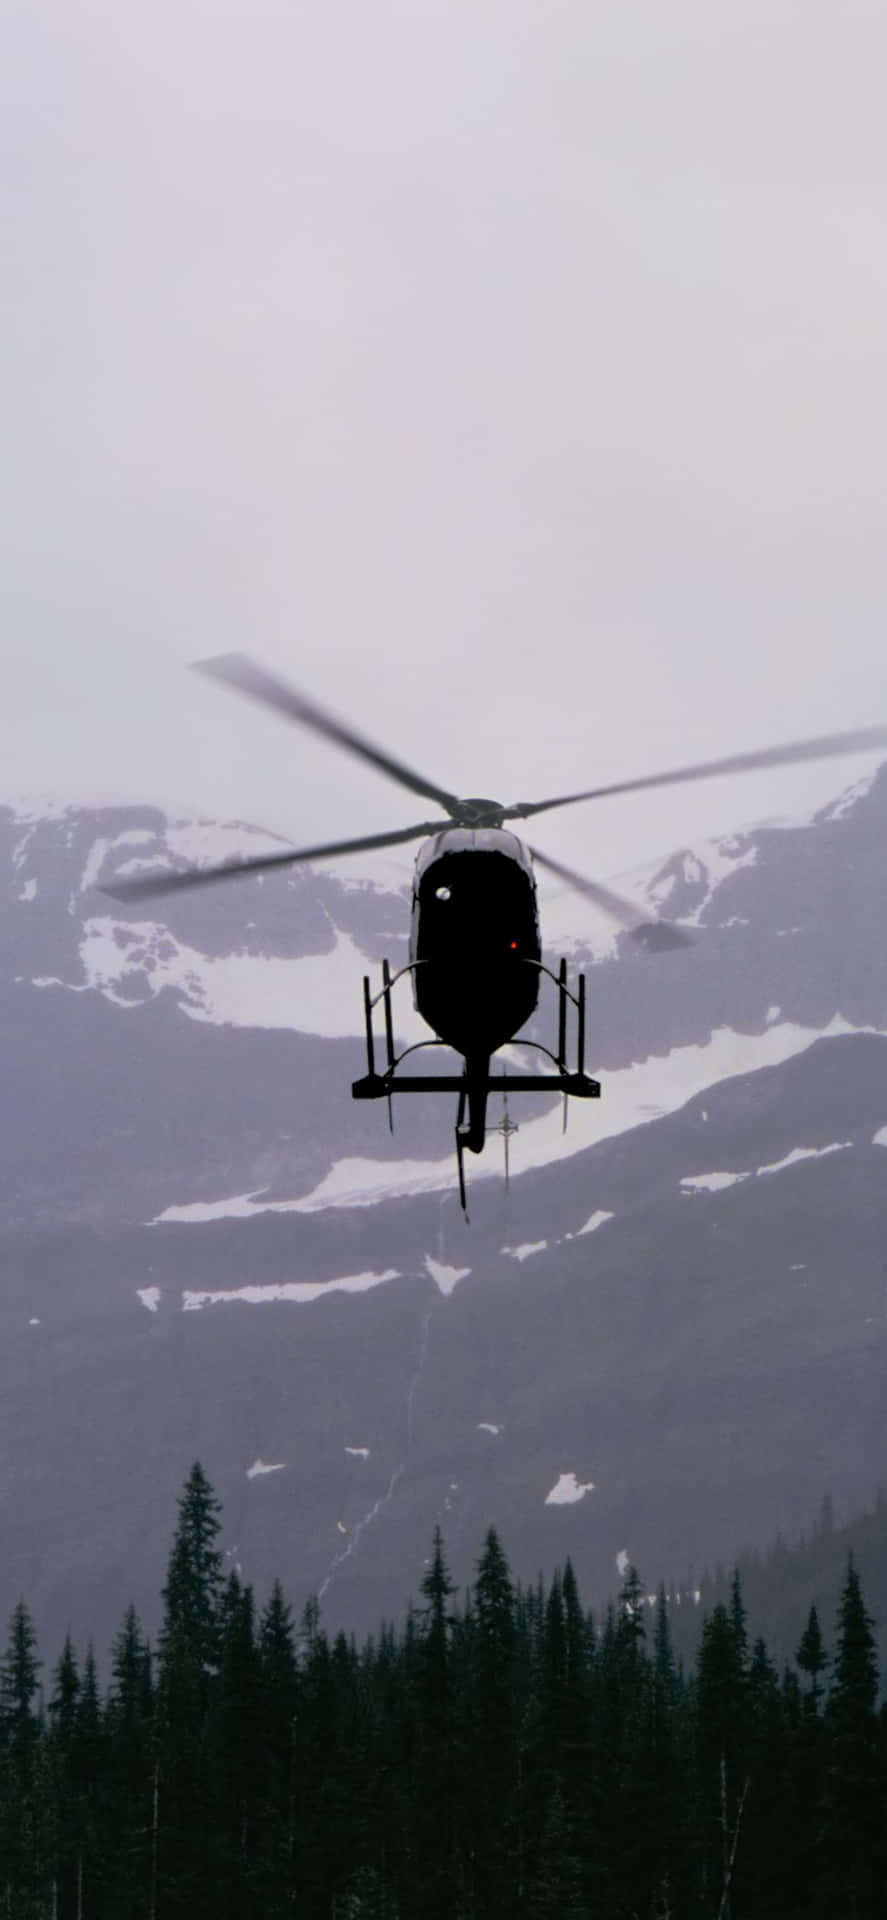 A Helicopter Flying Over A Mountain Range